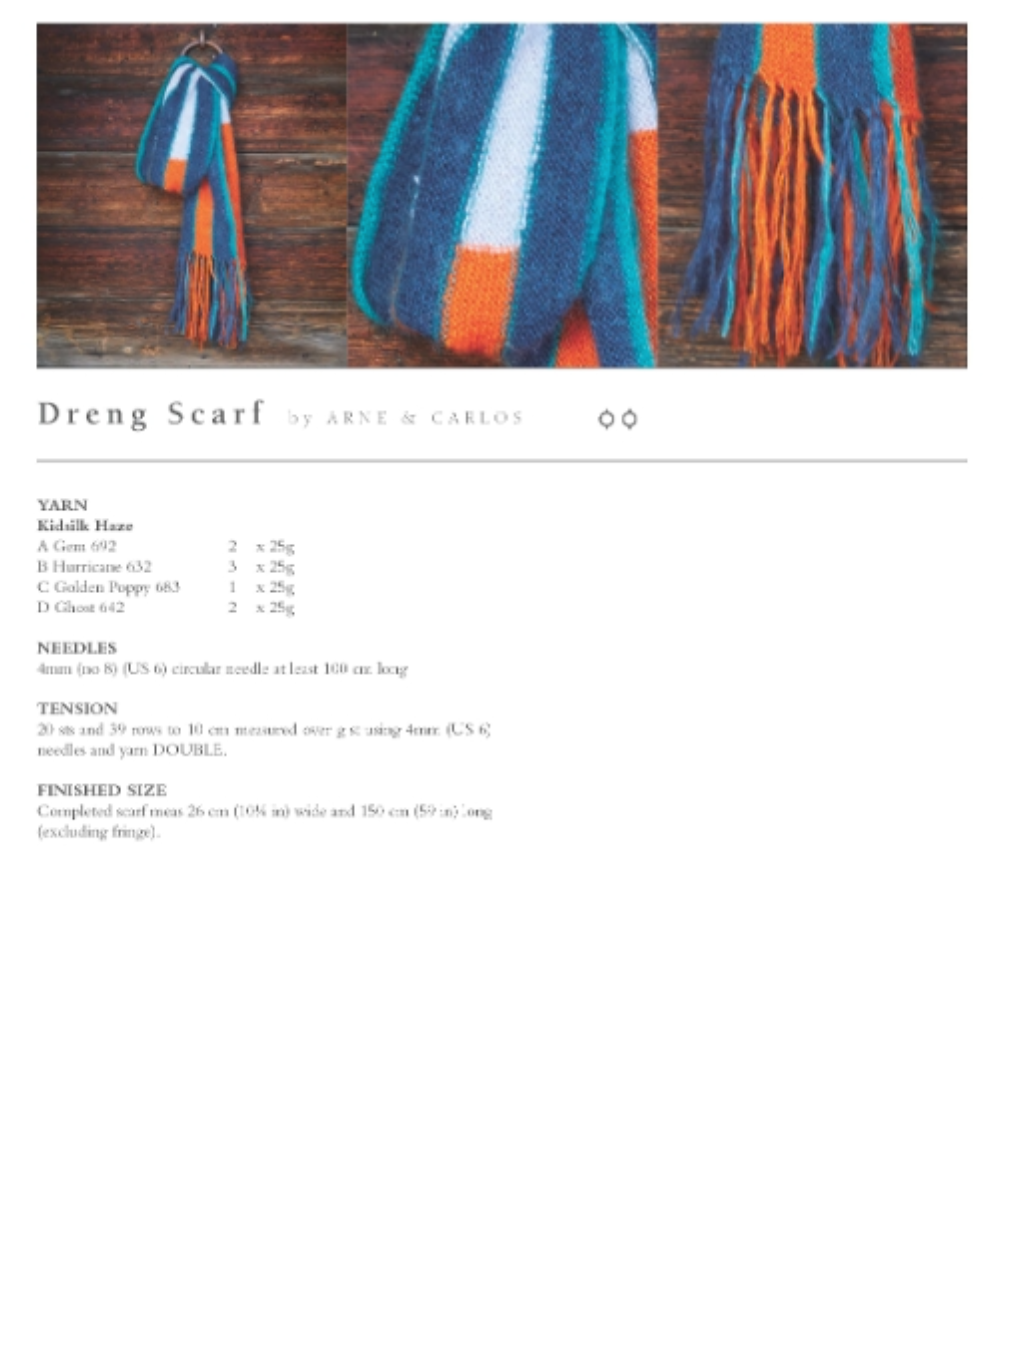 Dreng scarf.A blue, green teal, orange and white scarf with tassels.